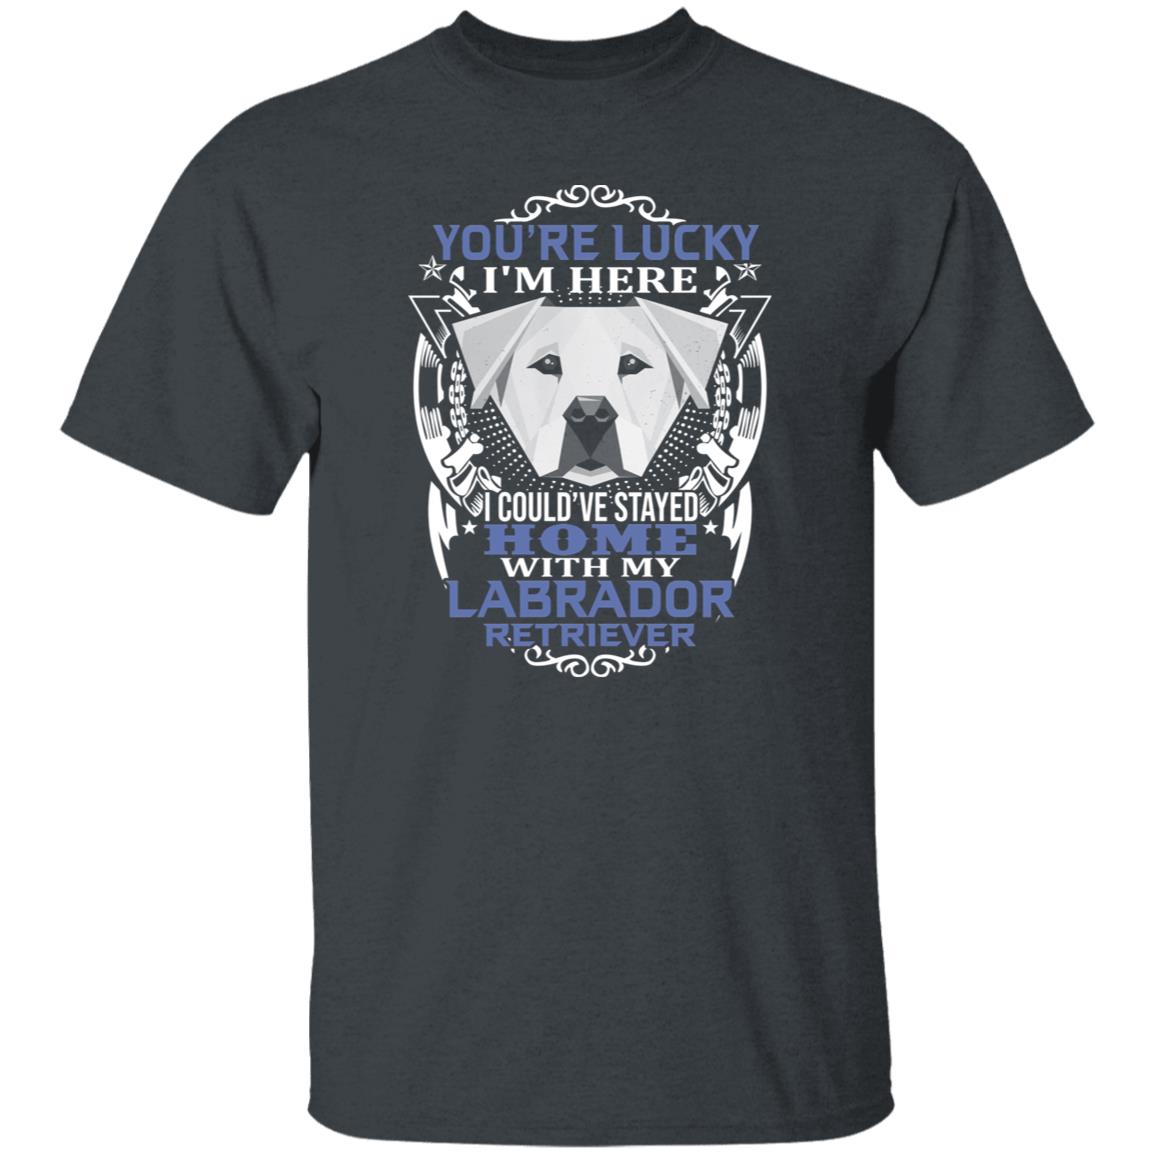 You are lucky I'm here - Labrador retriever owner Unisex t-shirt gift-Family-Gift-Planet